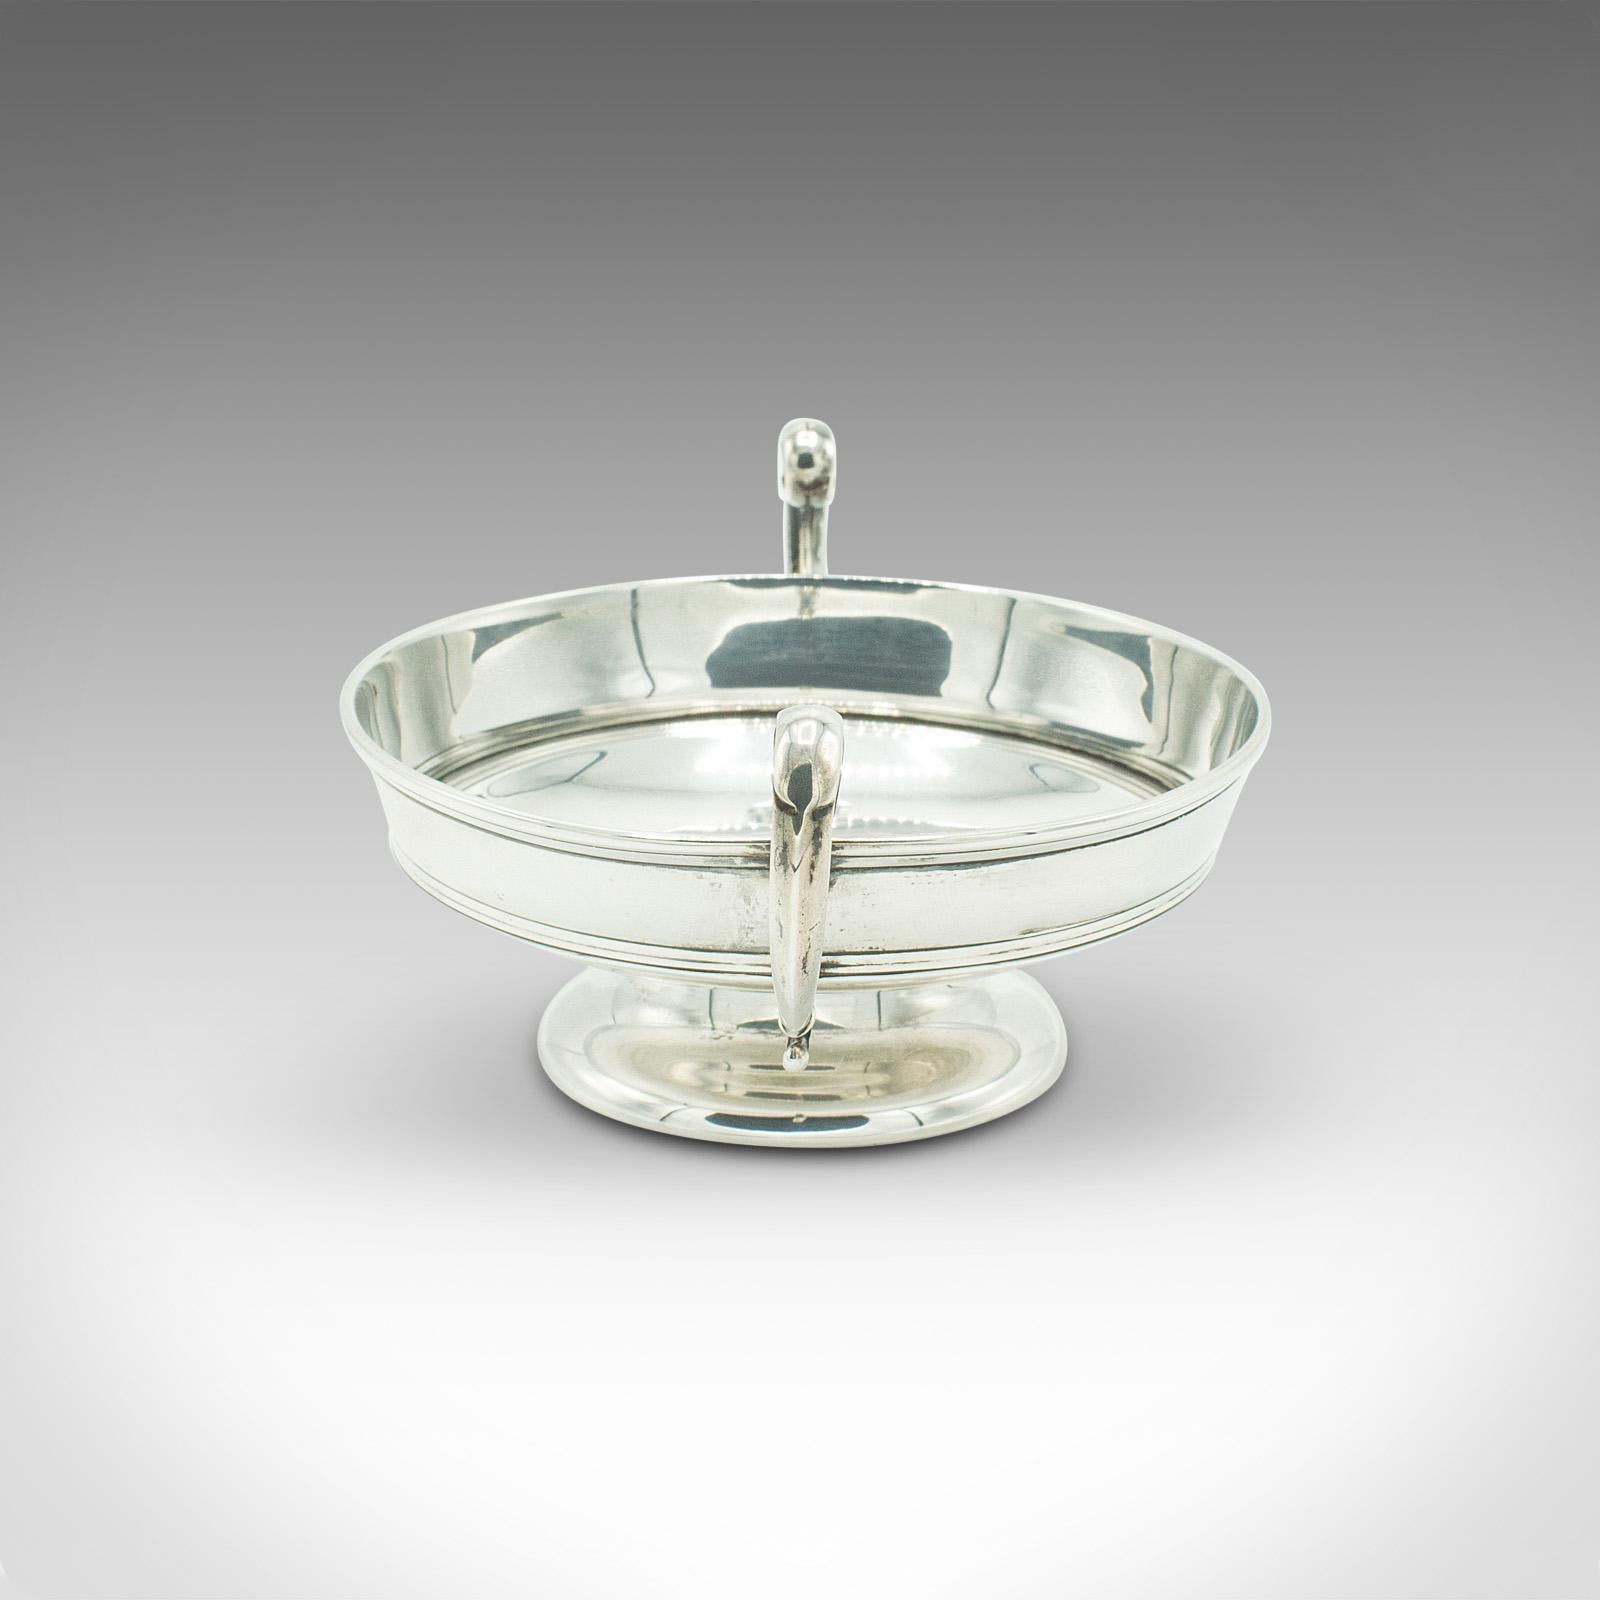 20th Century Pair of Antique Bonbon Dishes, English, Sterling Silver, Serving Bowl, Edwardian For Sale